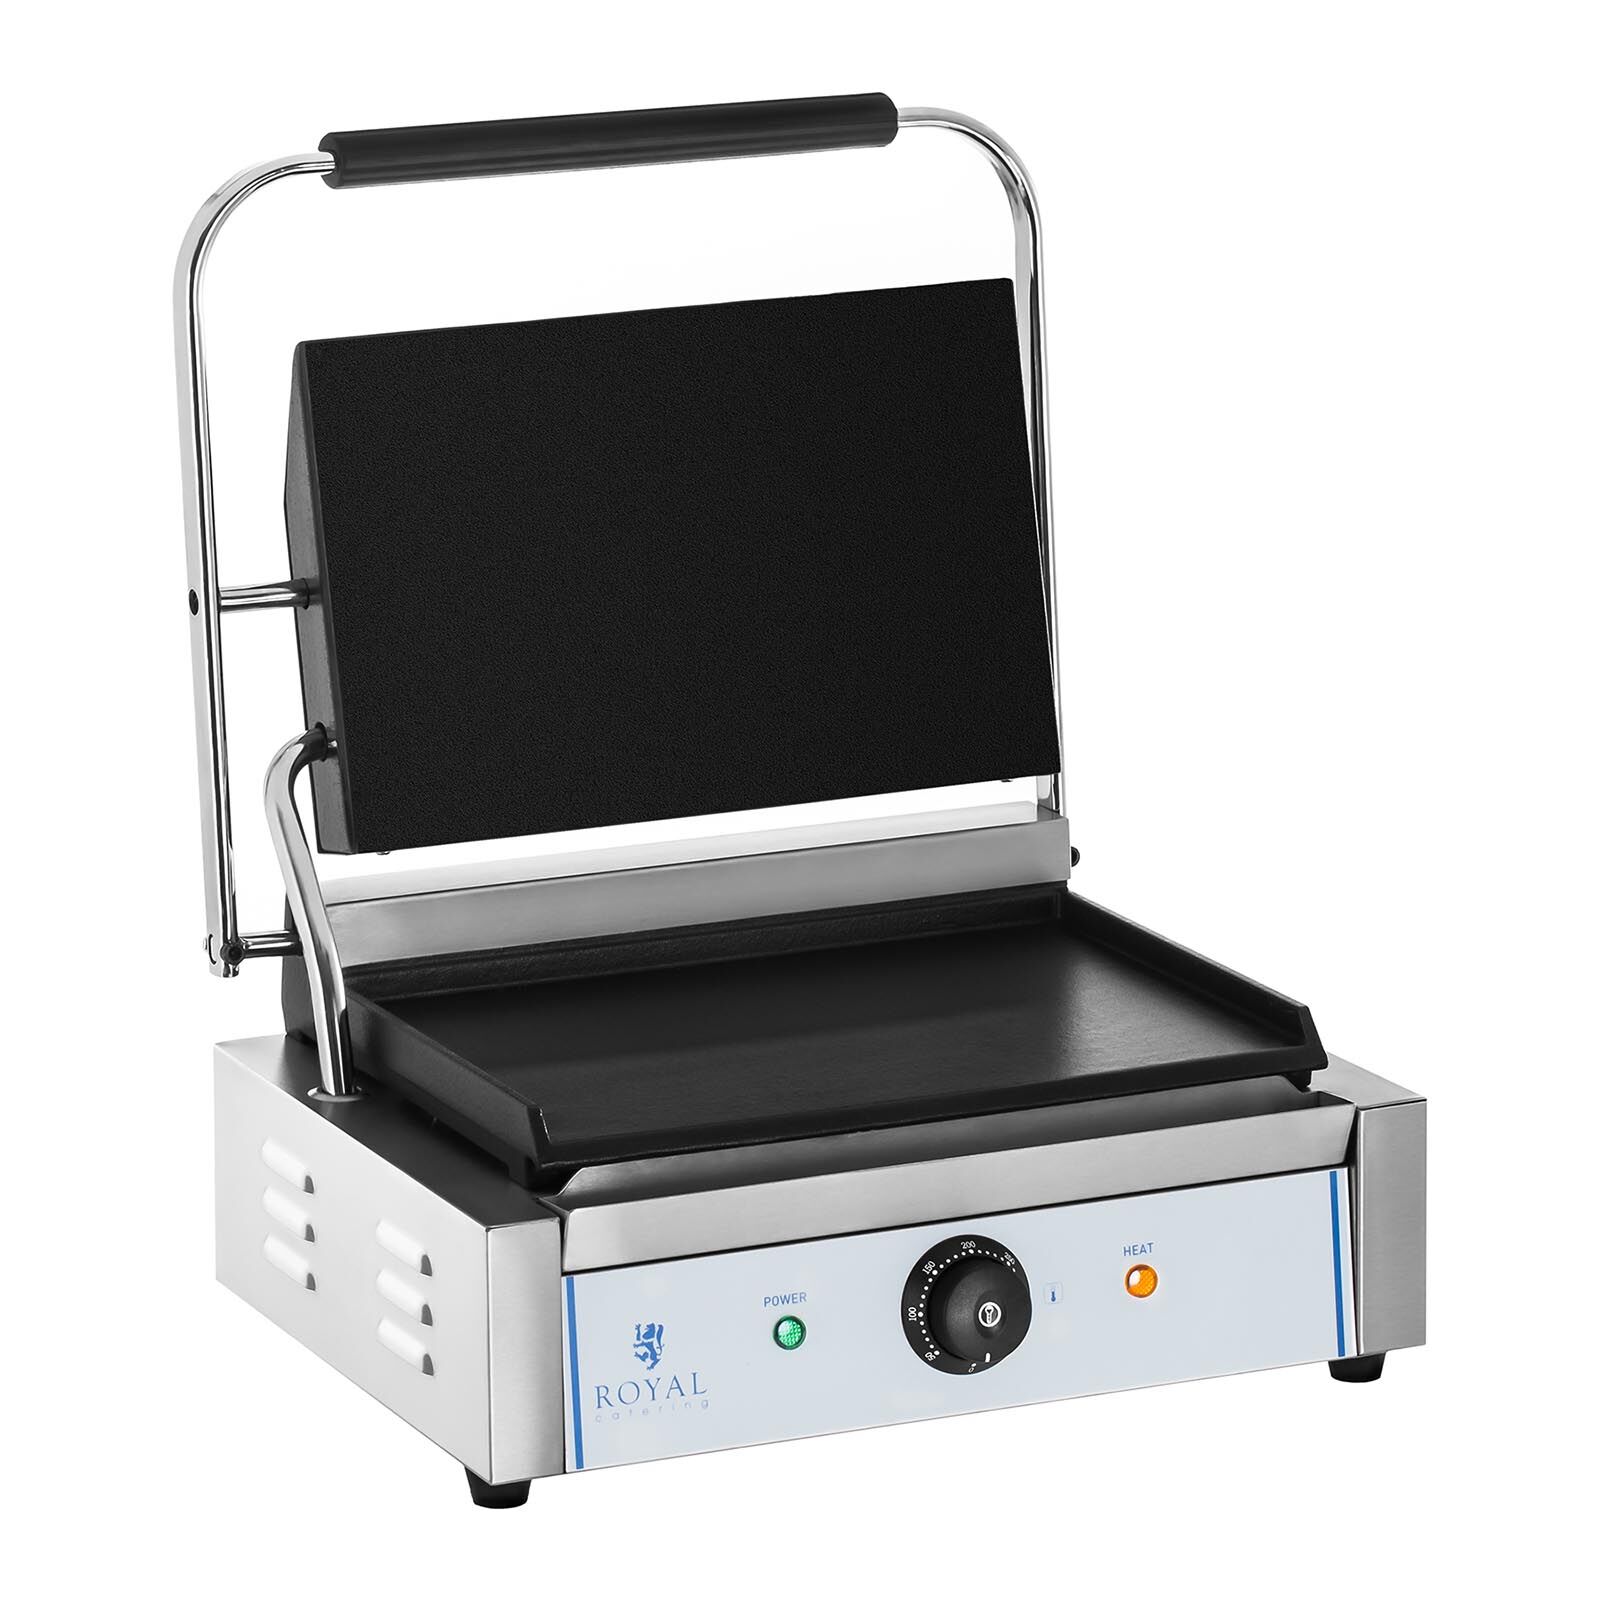 Royal Catering Dubbele contactgrill - glad - 2 x 2200 W RCKG-2200-F